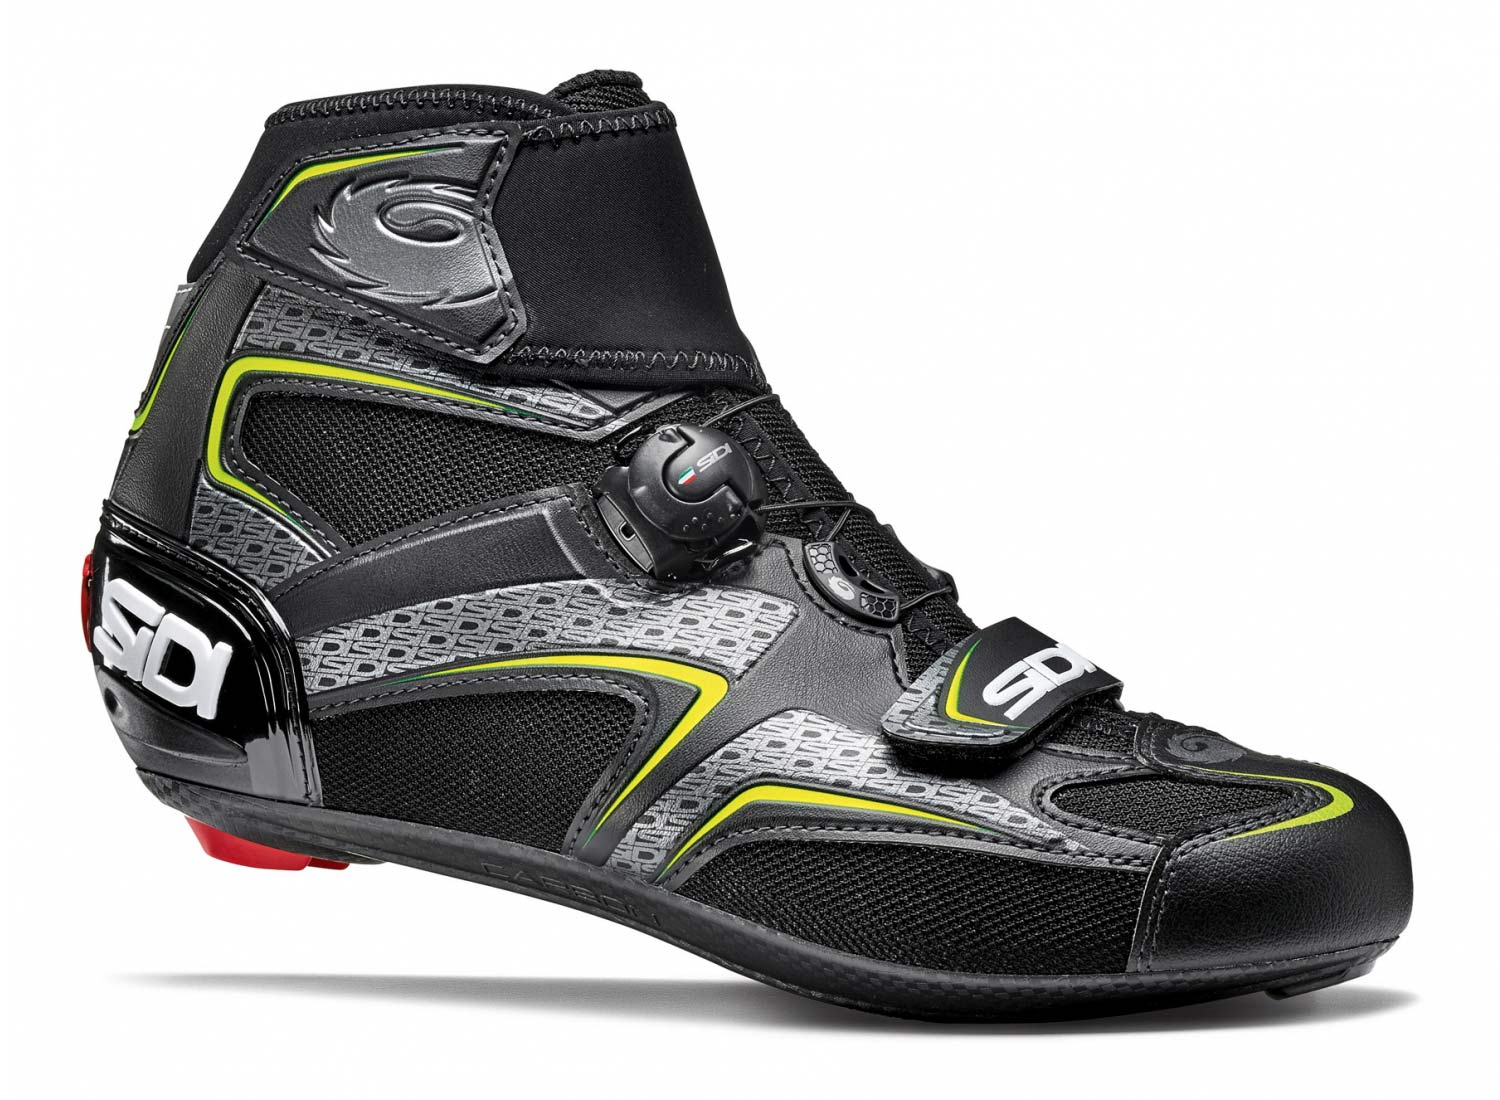 Warm feet for winter training with Sidi Zero road & MTB Frost Gore cycling shoes